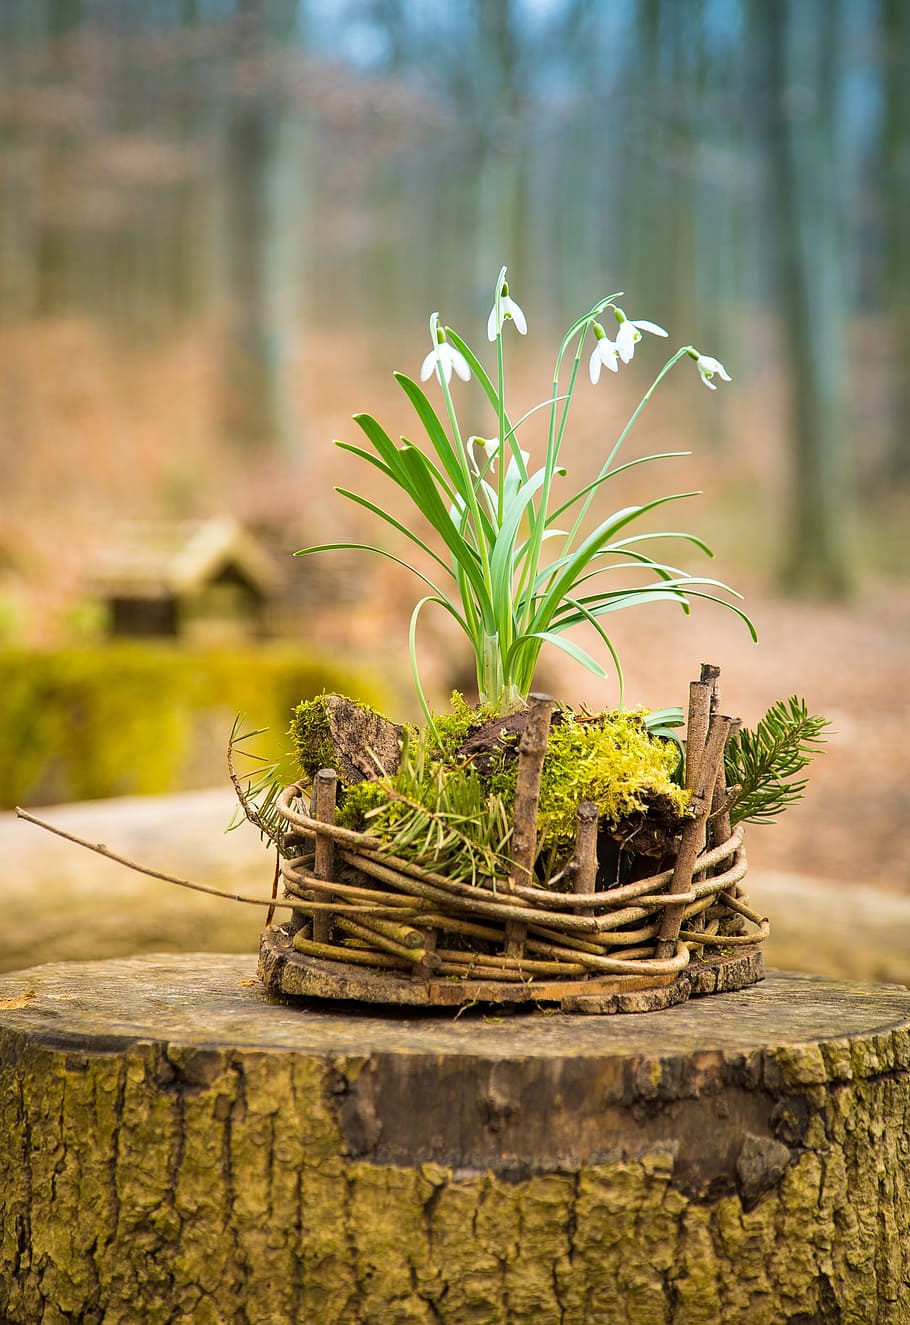 white, snowdrop flowers, brown, tree trunk selective-focus photography, Easter, Nest, Spring, Nature, easter nest, decoration